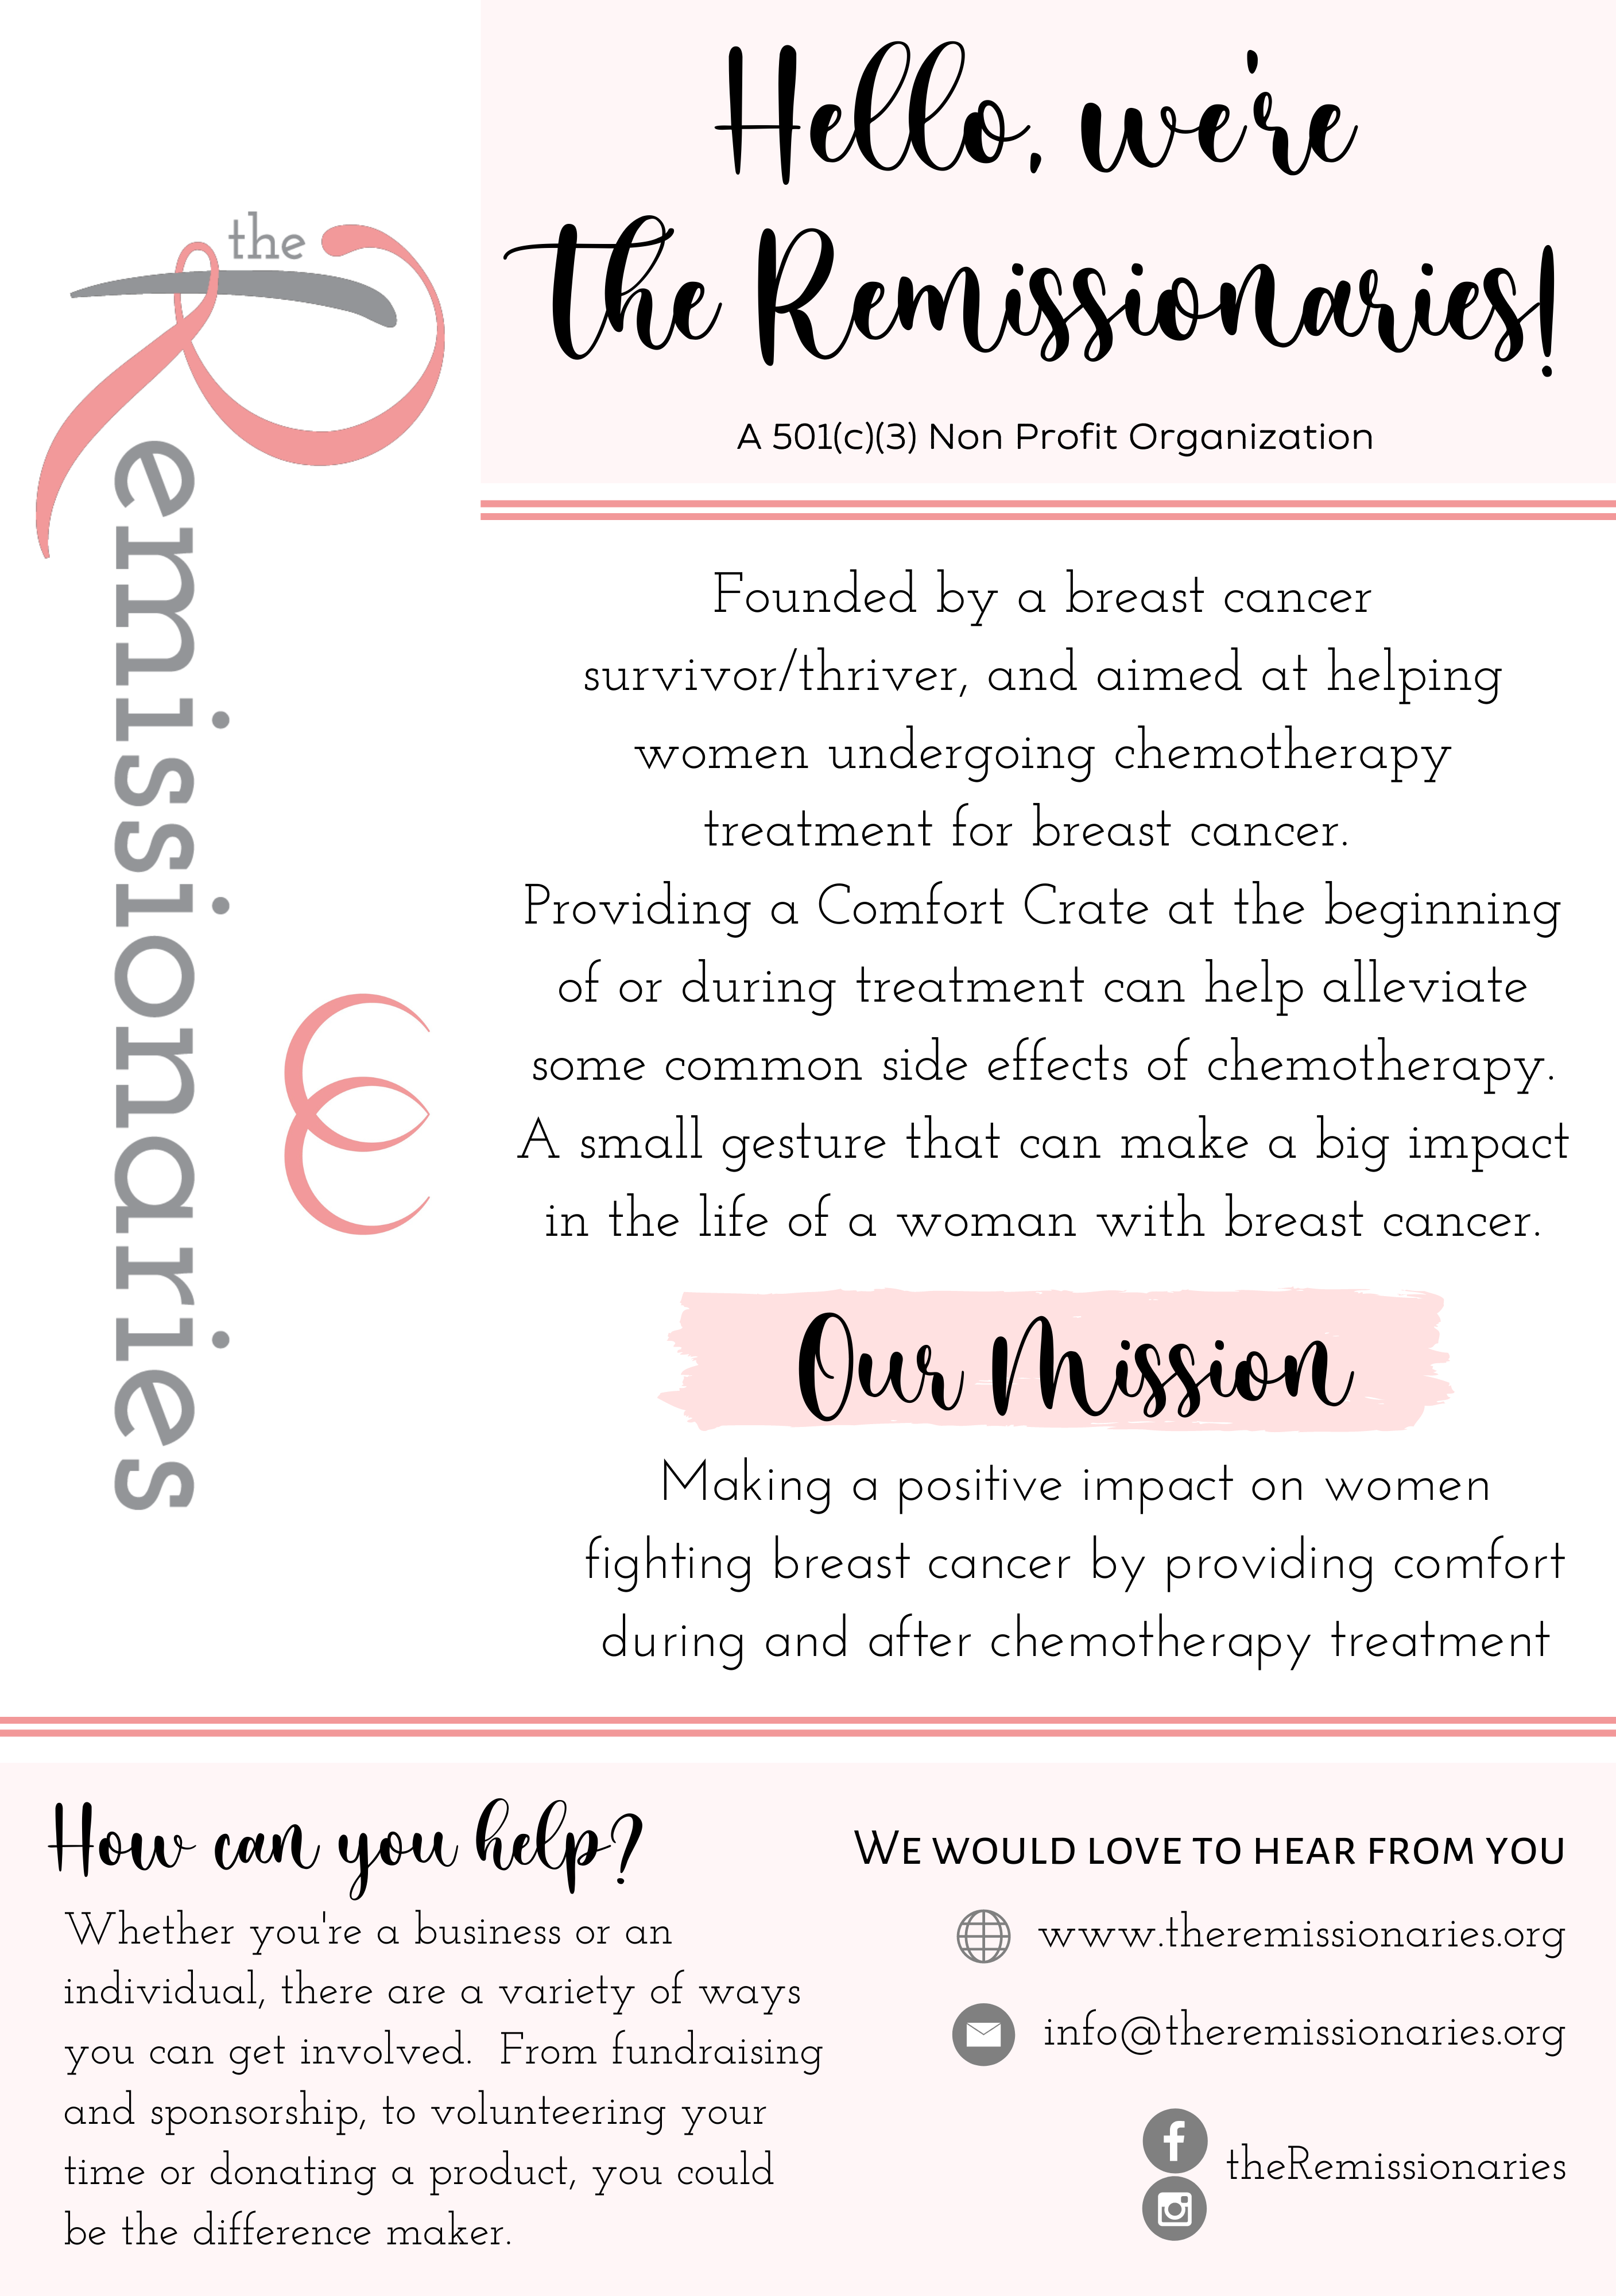 How you can help provide comfort to women fighting breast cancer during and after their chemo treatments with las vegas nonprofit organization The Remissionaries. Breast Cancer Awareness Month